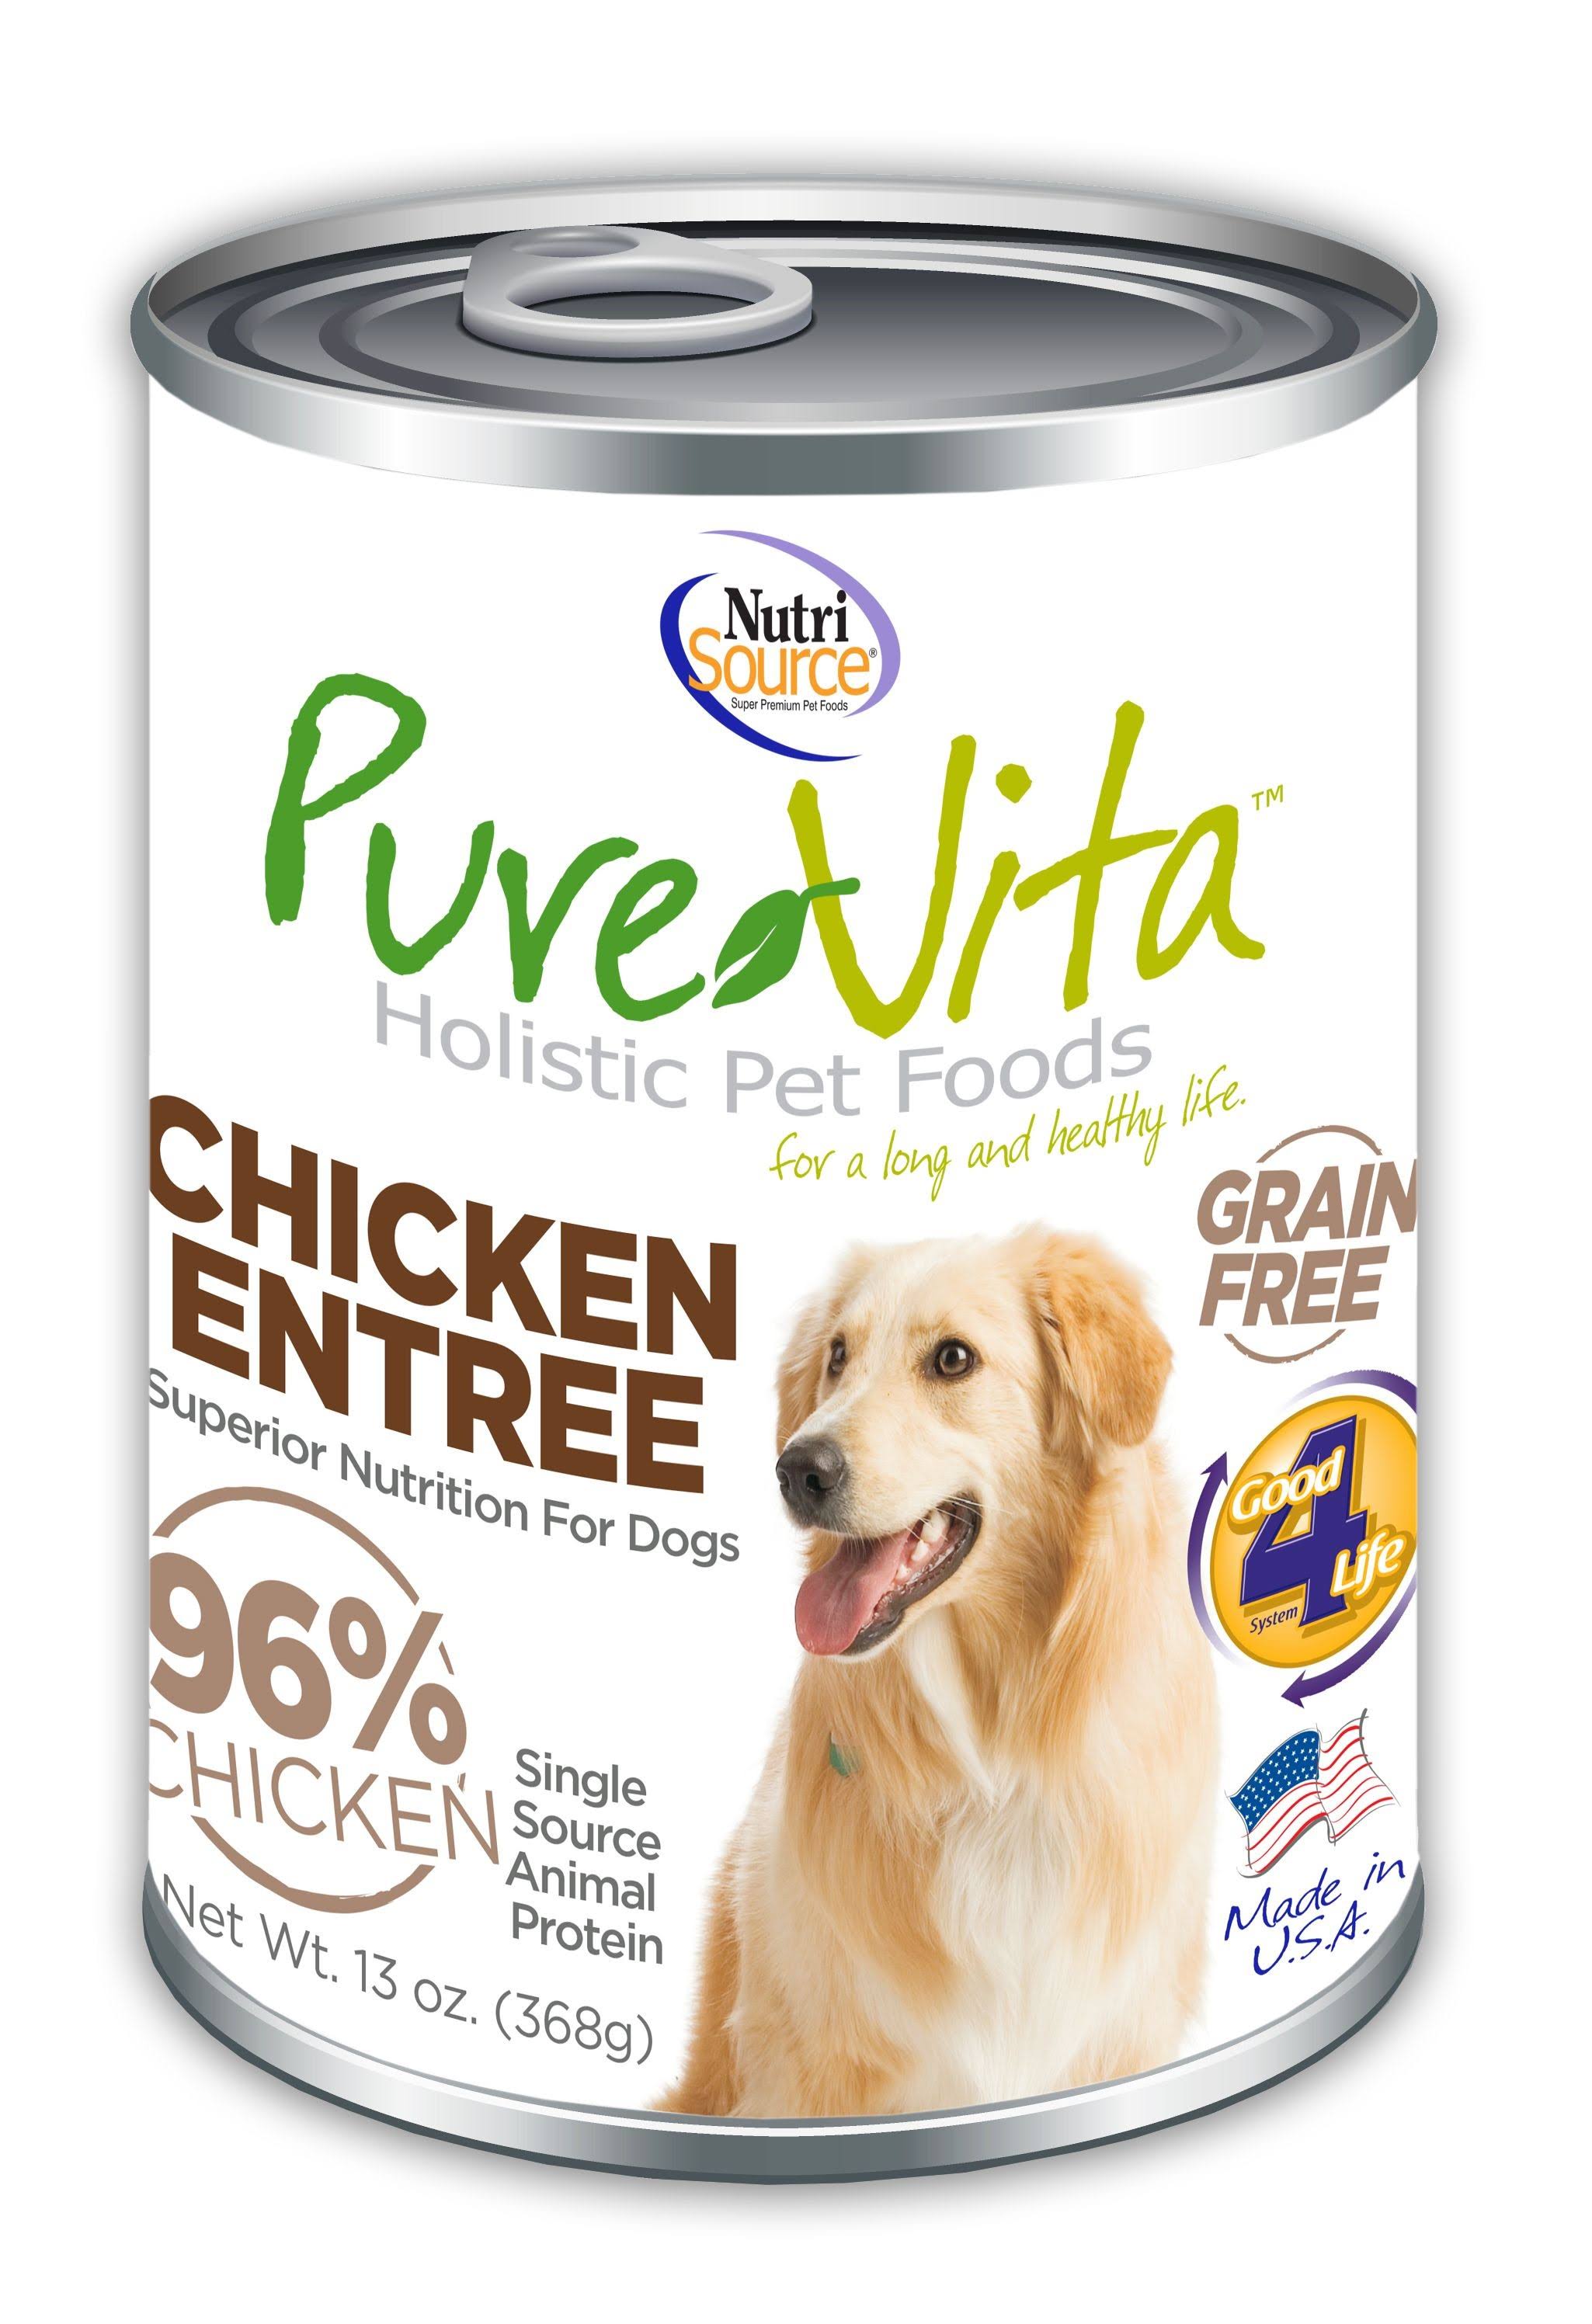 PureVita Grain Free 96% Real Chicken Entree Canned Dog Food, 13-oz